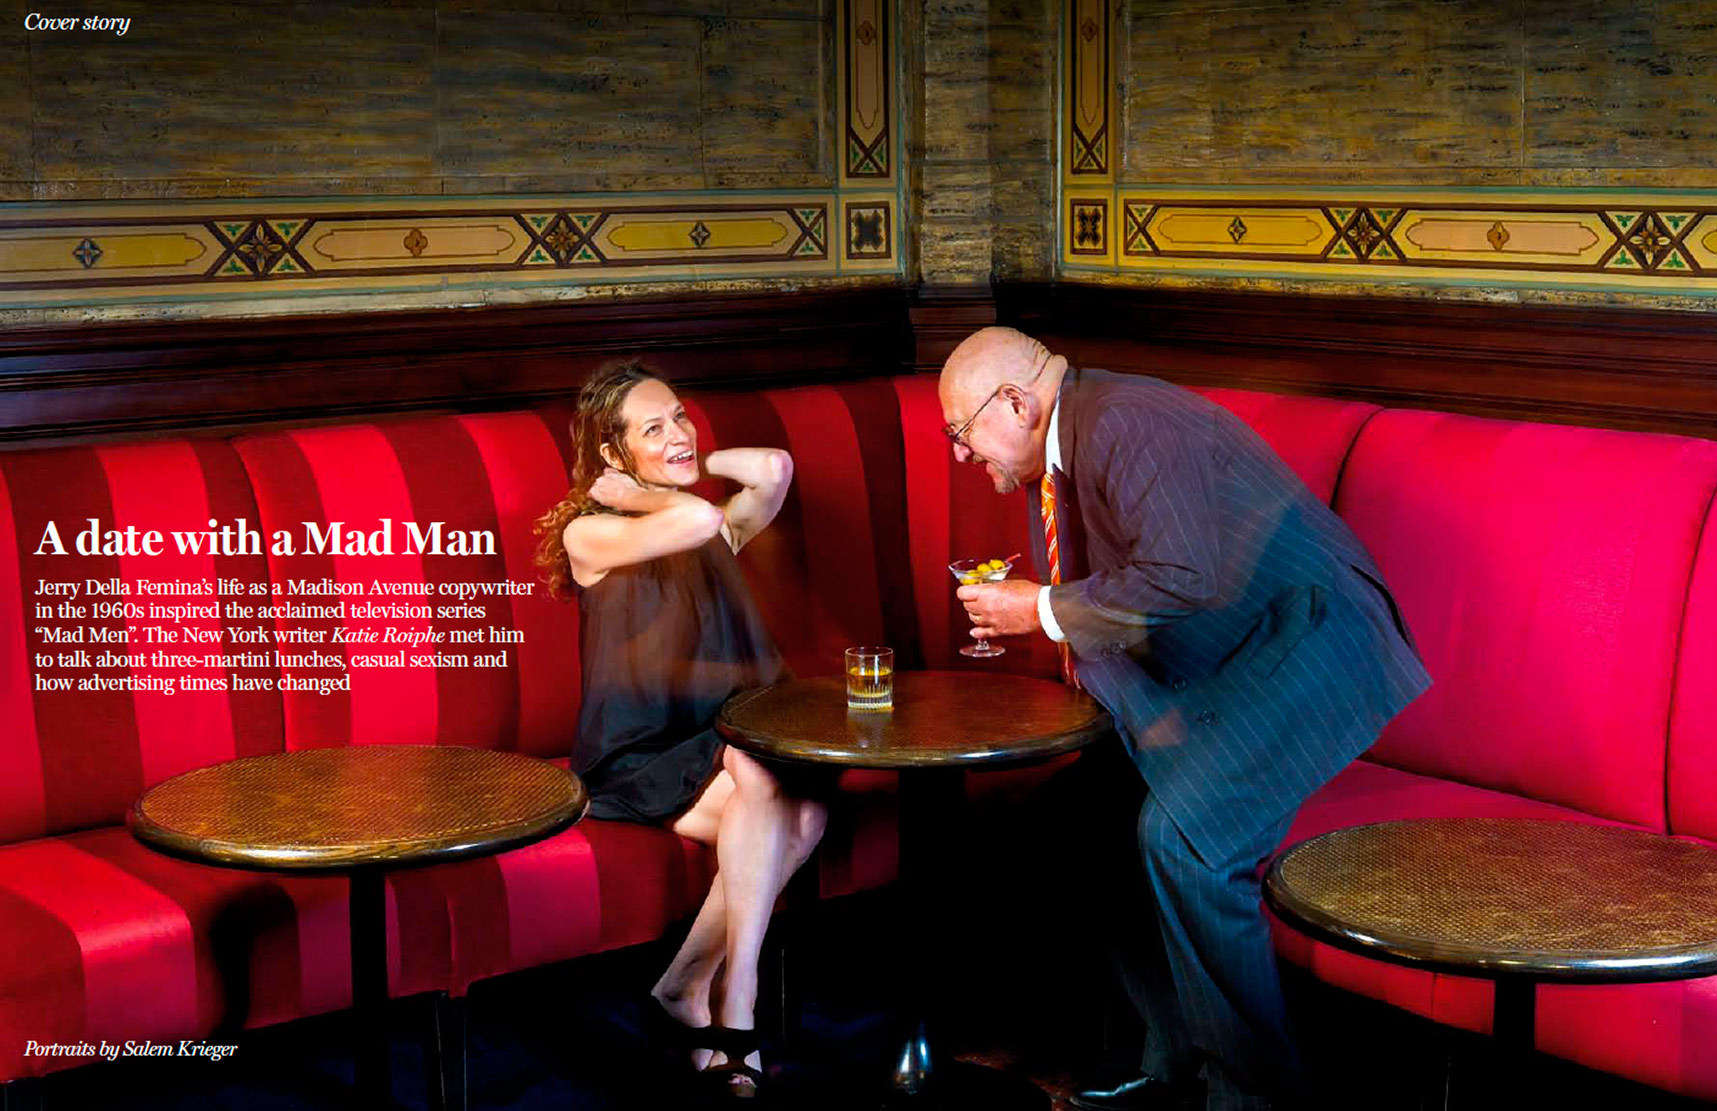 Cover story for FT Weekend, London - The man whom the TV series "Mad Men" was based on; Jerry Della Femina with New York Mag. writer Katie Roiphe photographed at the Campbell Apts., Grand Central Station, NYC : Portraits : New York City based photographer and video specializing in portrait corporate portraits, video, editorial stories for on location and architectural photography